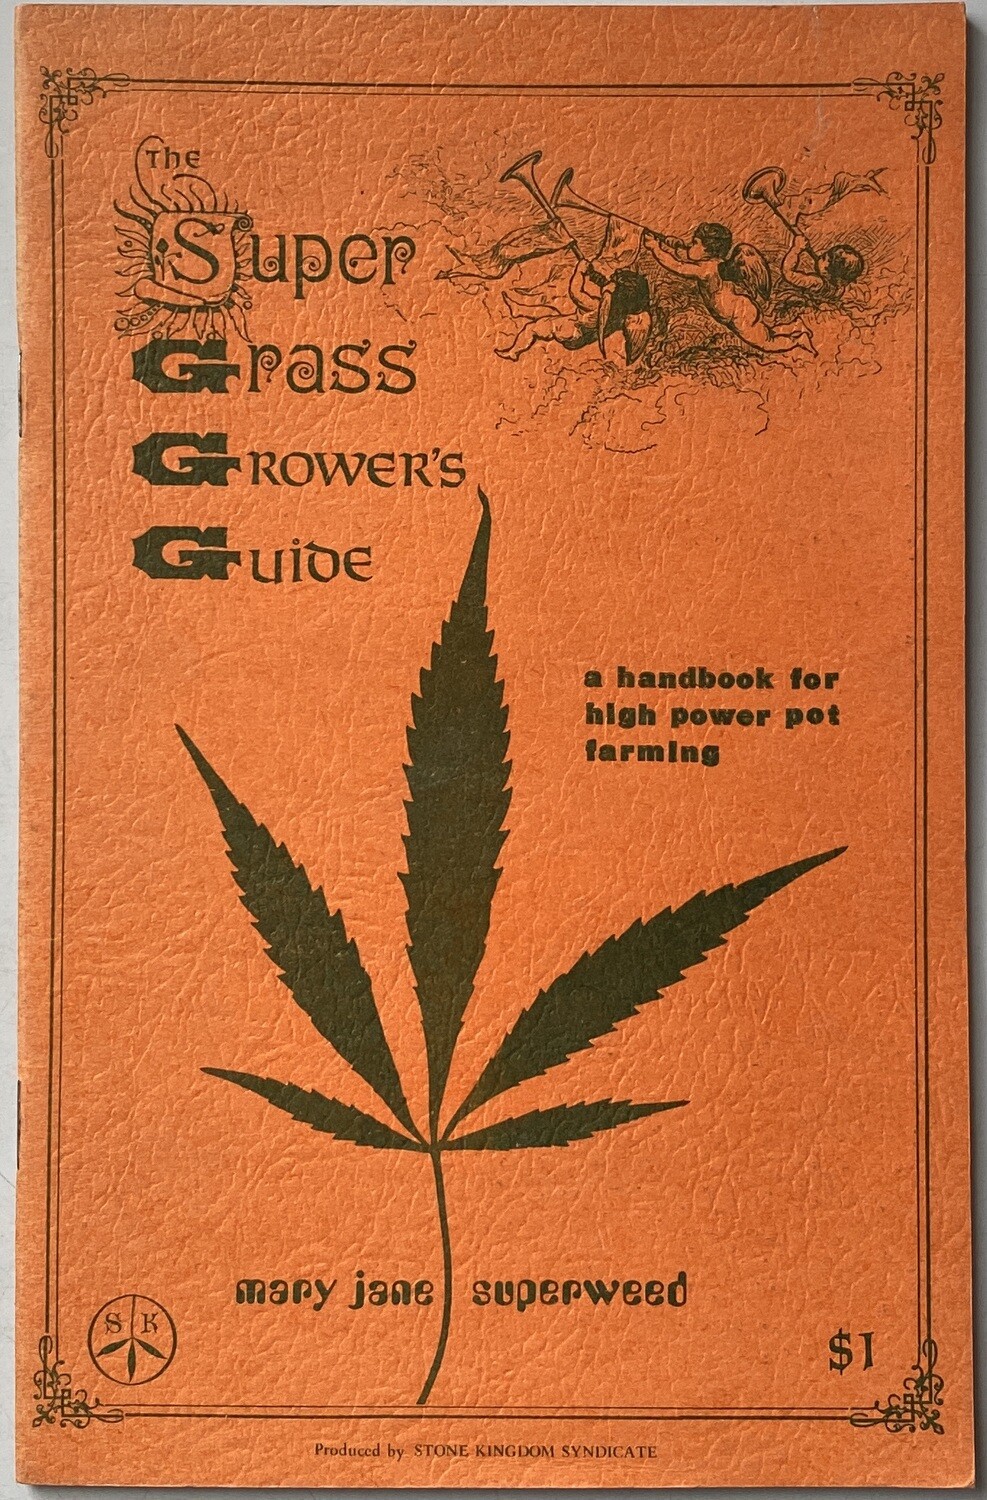 The Super Grass Grower's Guide